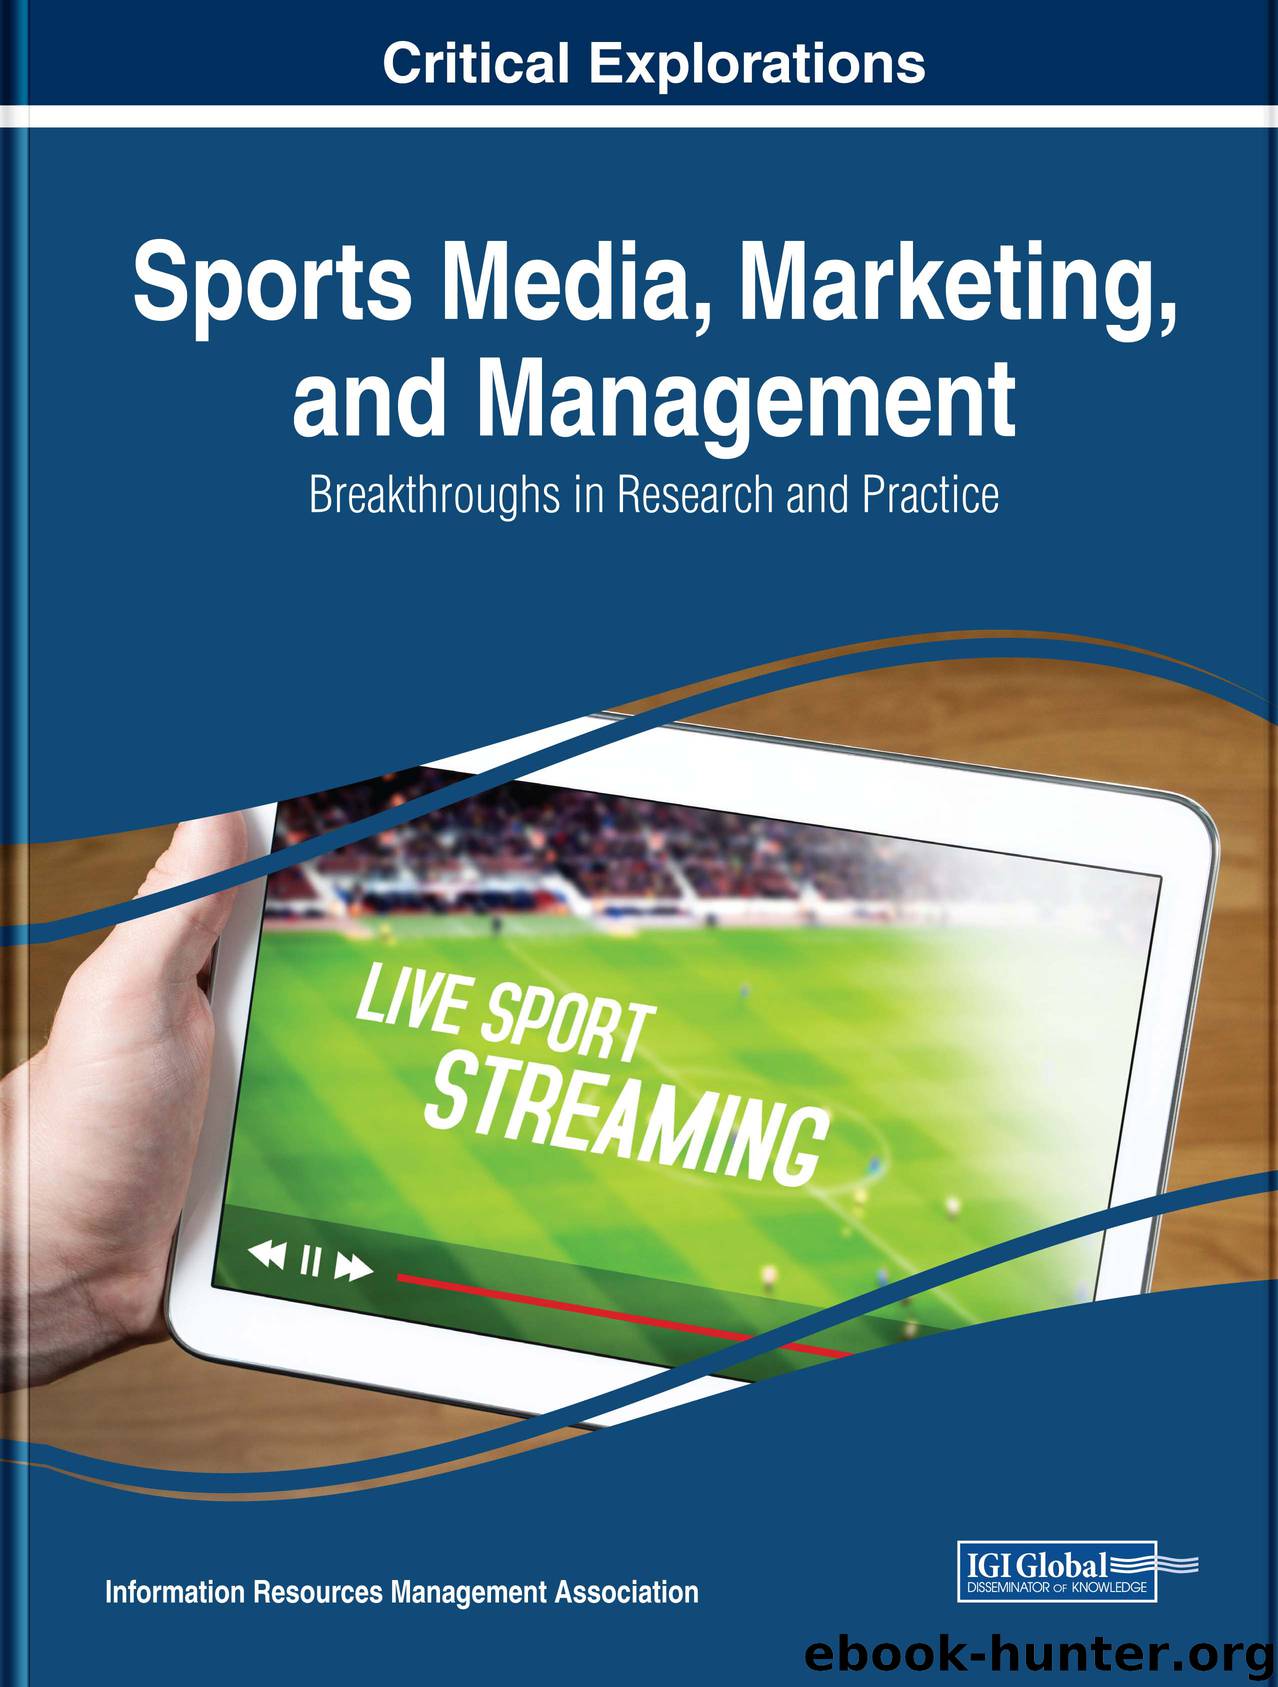 Sports Media, Marketing, and Management by Information Resources Management Association